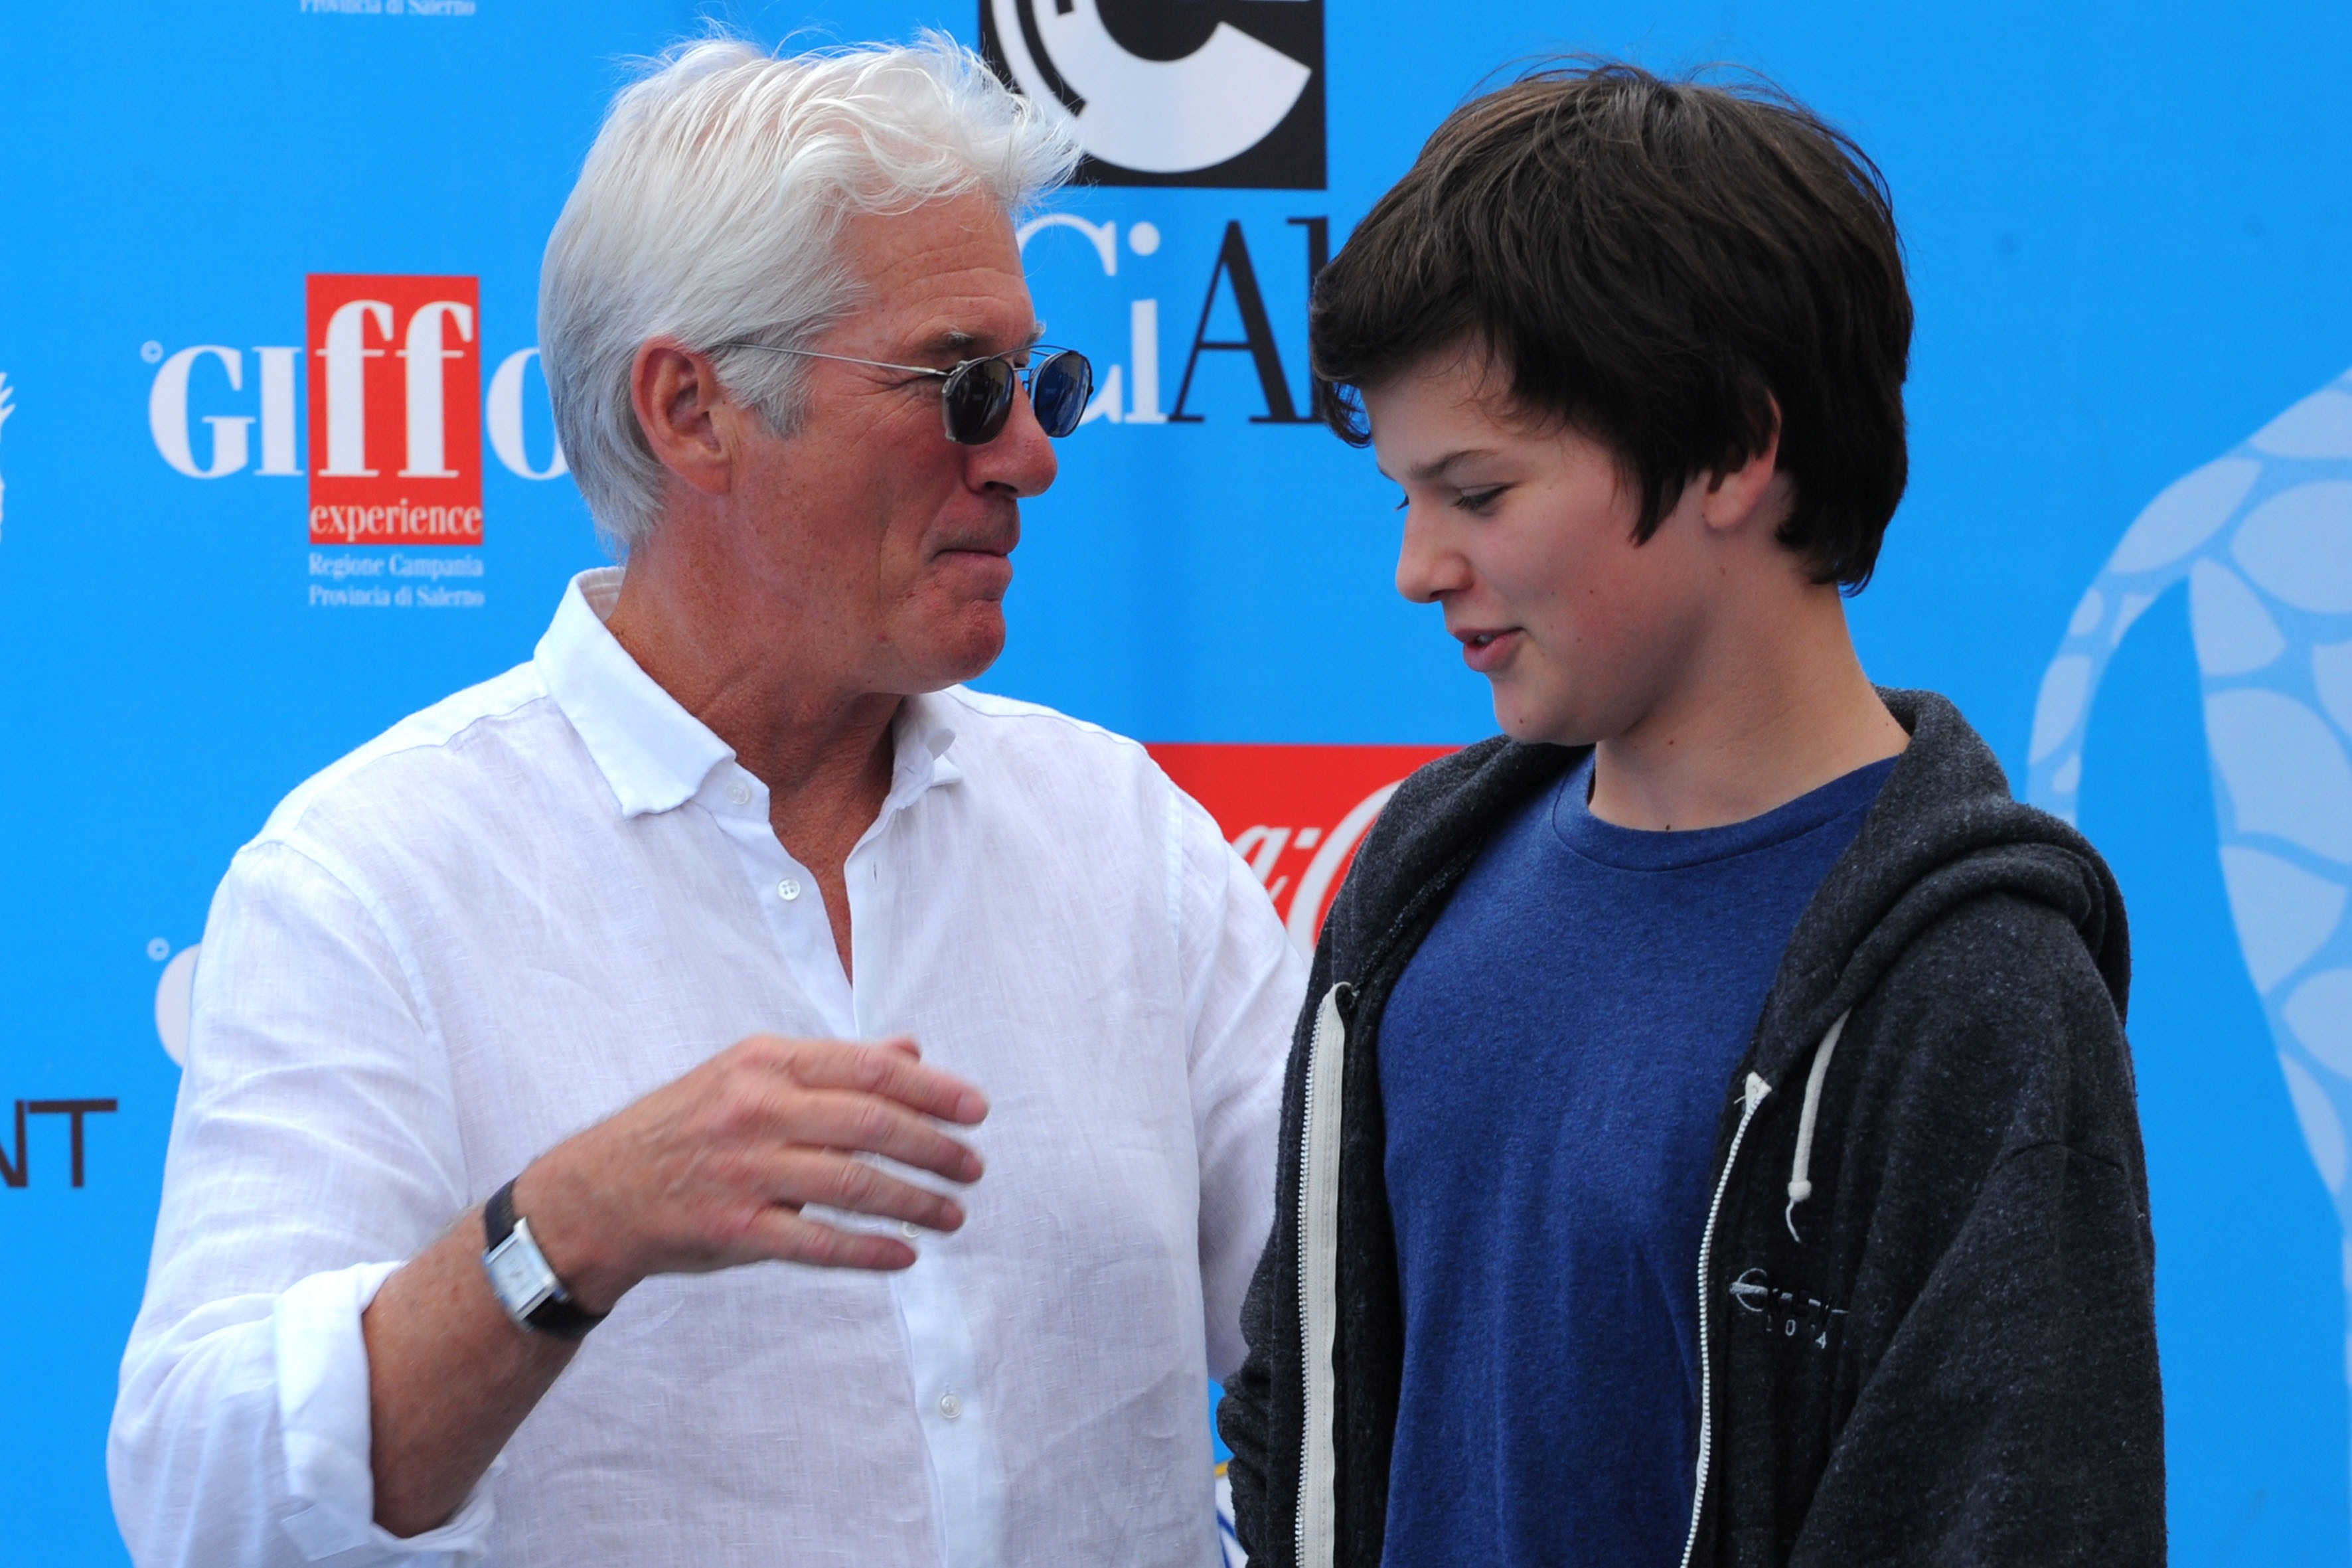 Richard Gere and Homer James Jigme Gere at the 44th edition of the Giffoni Film Festival in Giffoni Valle Piana, Italy on July 22, 2014 | Source: Getty Images